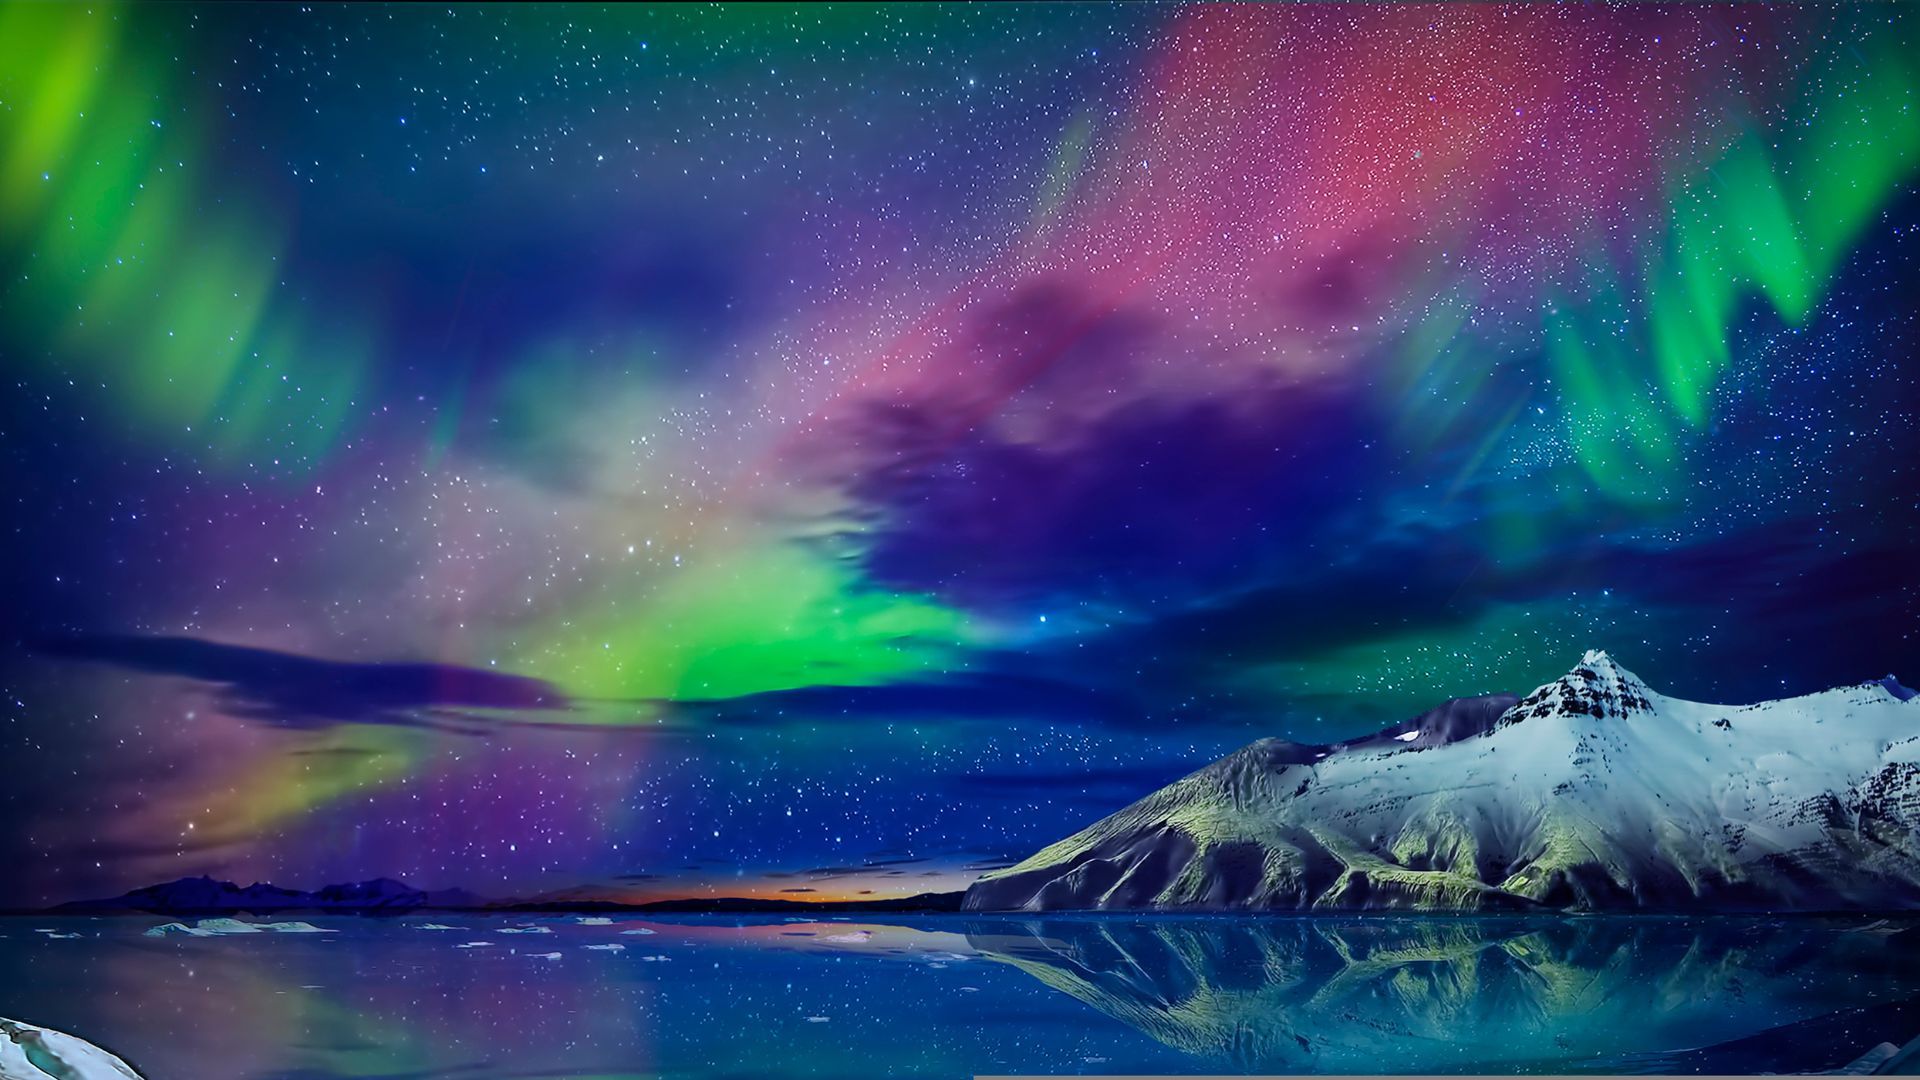 Stunning Images Of The Aurora